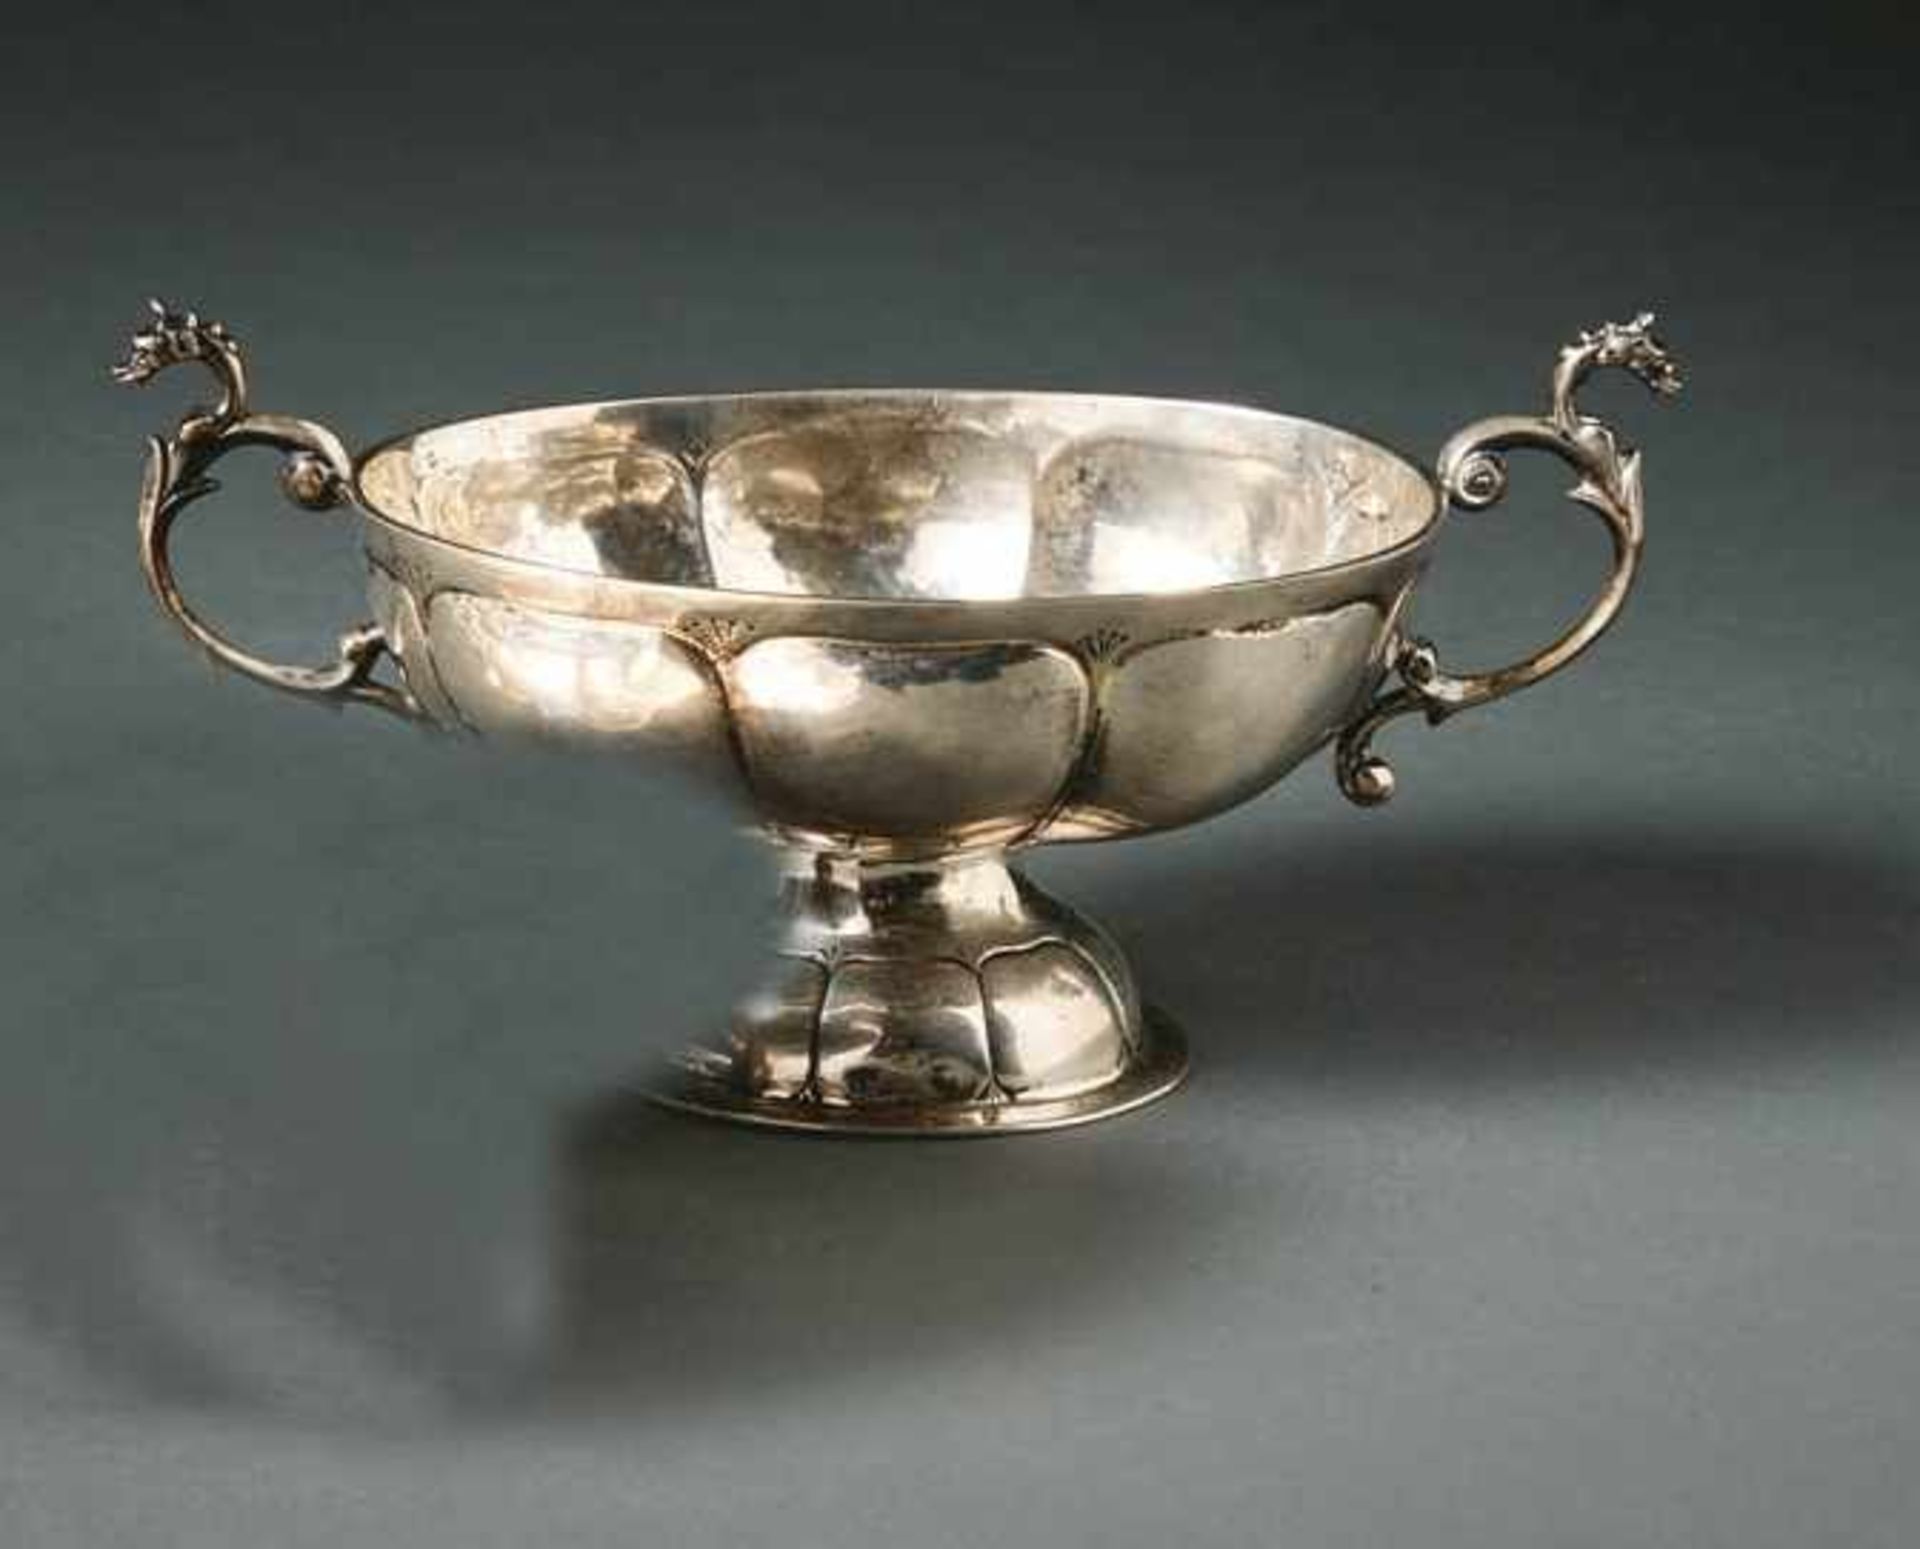 Small bowl with handle19th centuryOval foot and oval bowl with buckle decoration, two raised